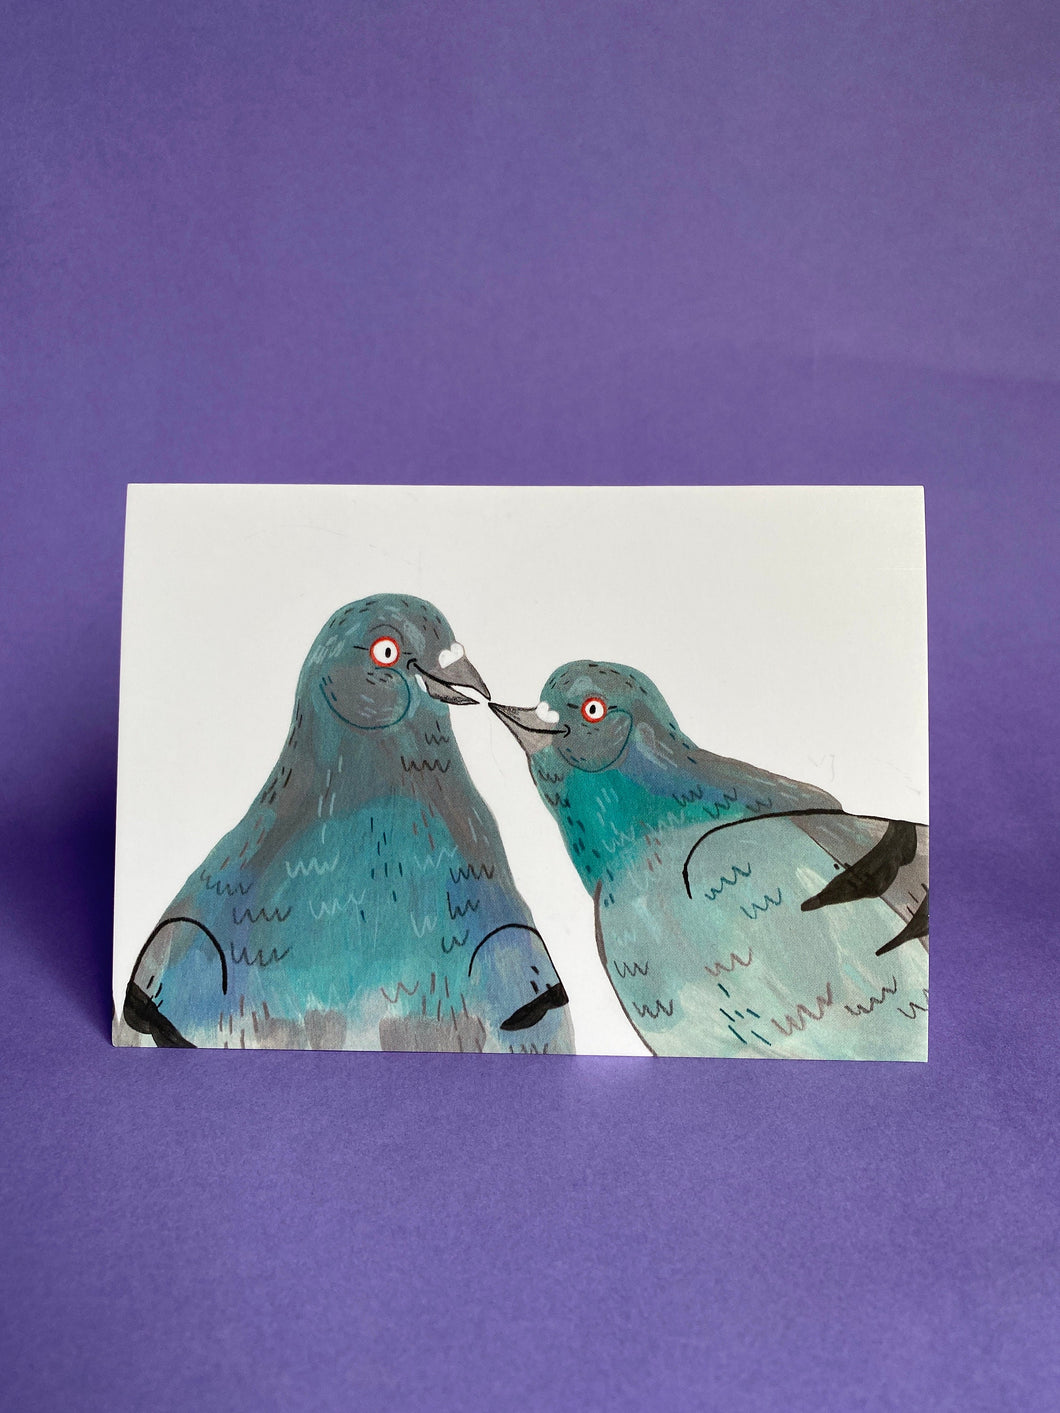 Pigeon in love - Pigeon Fancier thinking of you card A6 Greeting card -  Bird animal illustration - moving house - Fernandes Makes